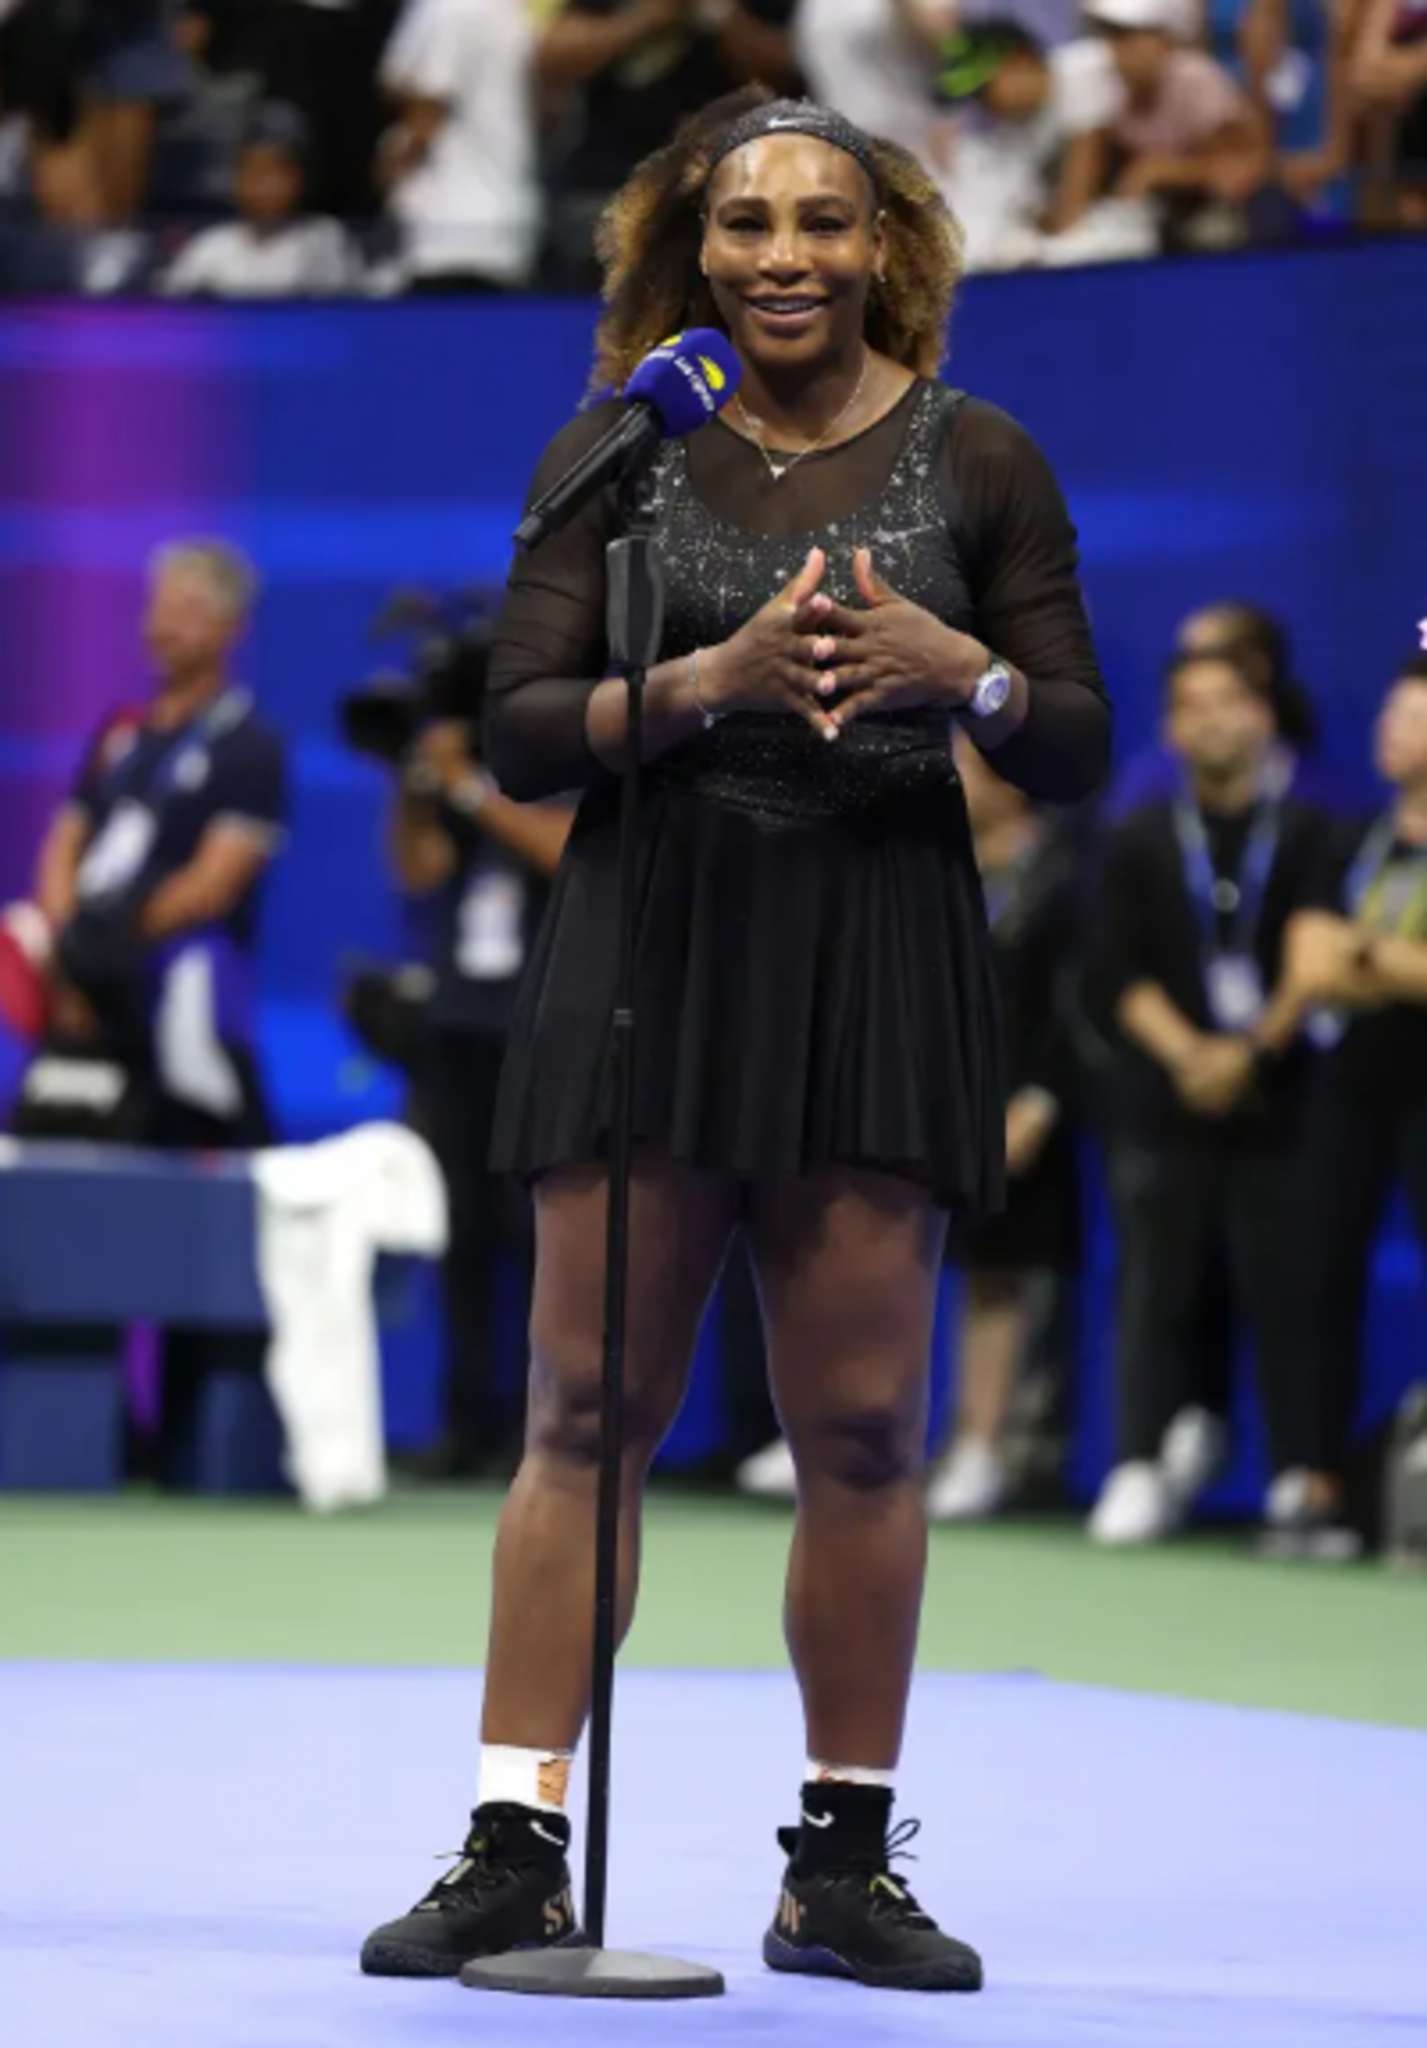 For her opening match of the 2022 US Open, Serena Williams wore a specially designed Nike outfit that was rich in significance